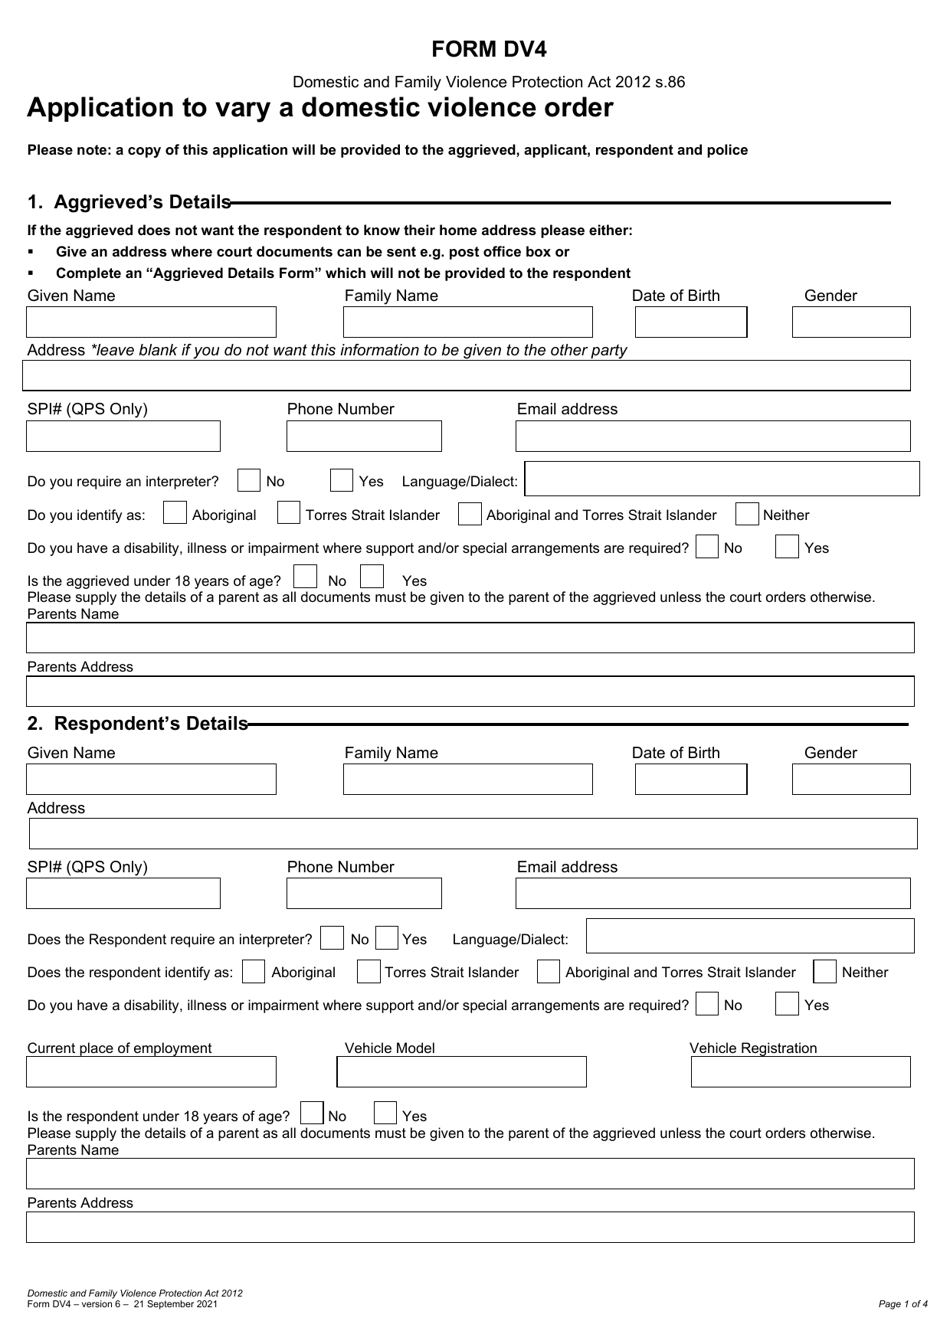 Form DV4 Application to Vary a Domestic Violence Order - Queensland, Australia, Page 1